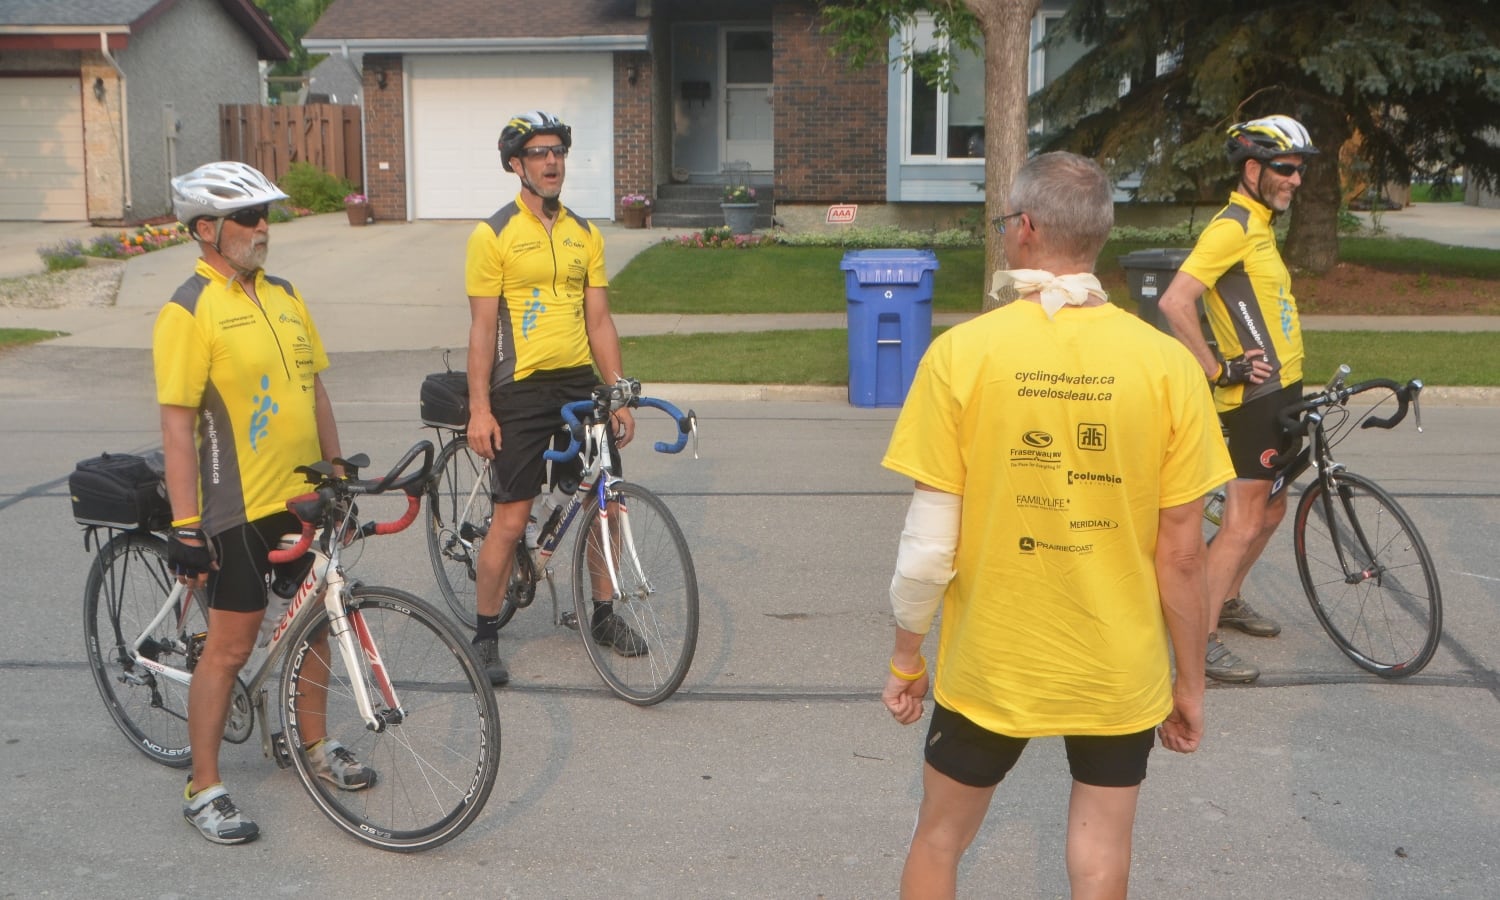 Accident Day - Aug 17, 2014 Rob welcoming the cyclists at the end of the day .